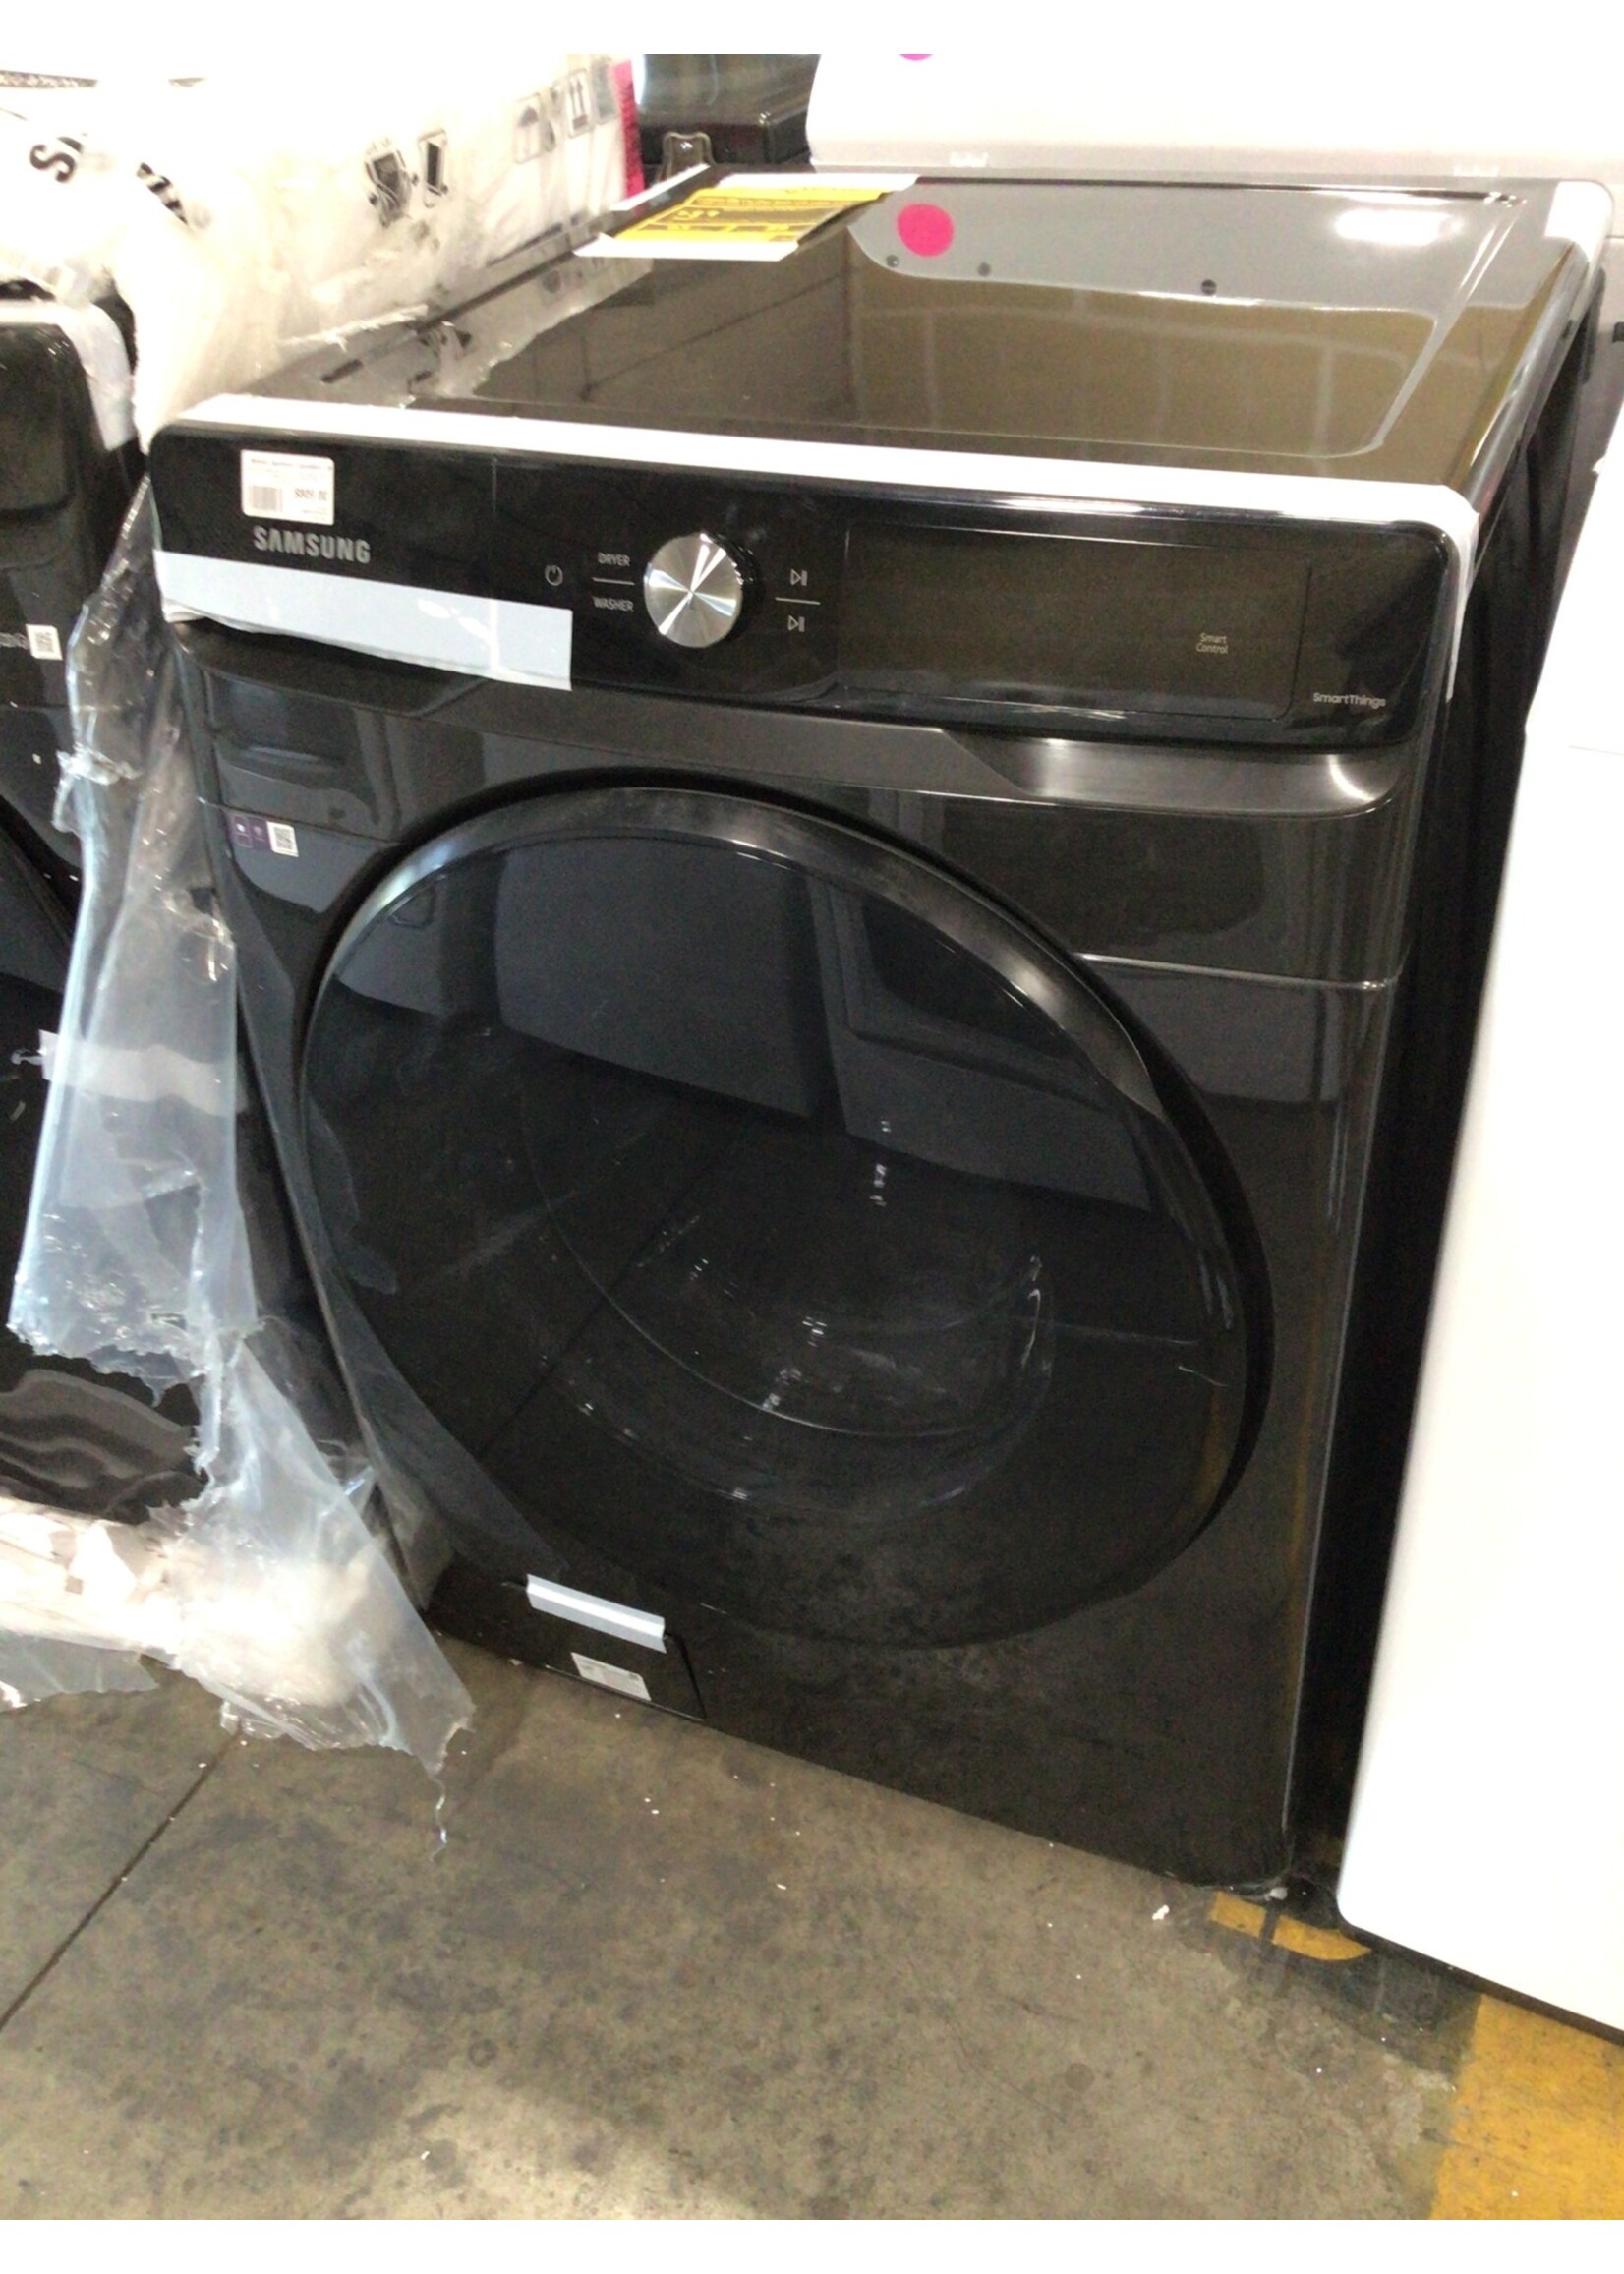 Samsung 4.5 Cu. Ft. Large Capacity Smart Dial Front Load Washer in Brushed  Black